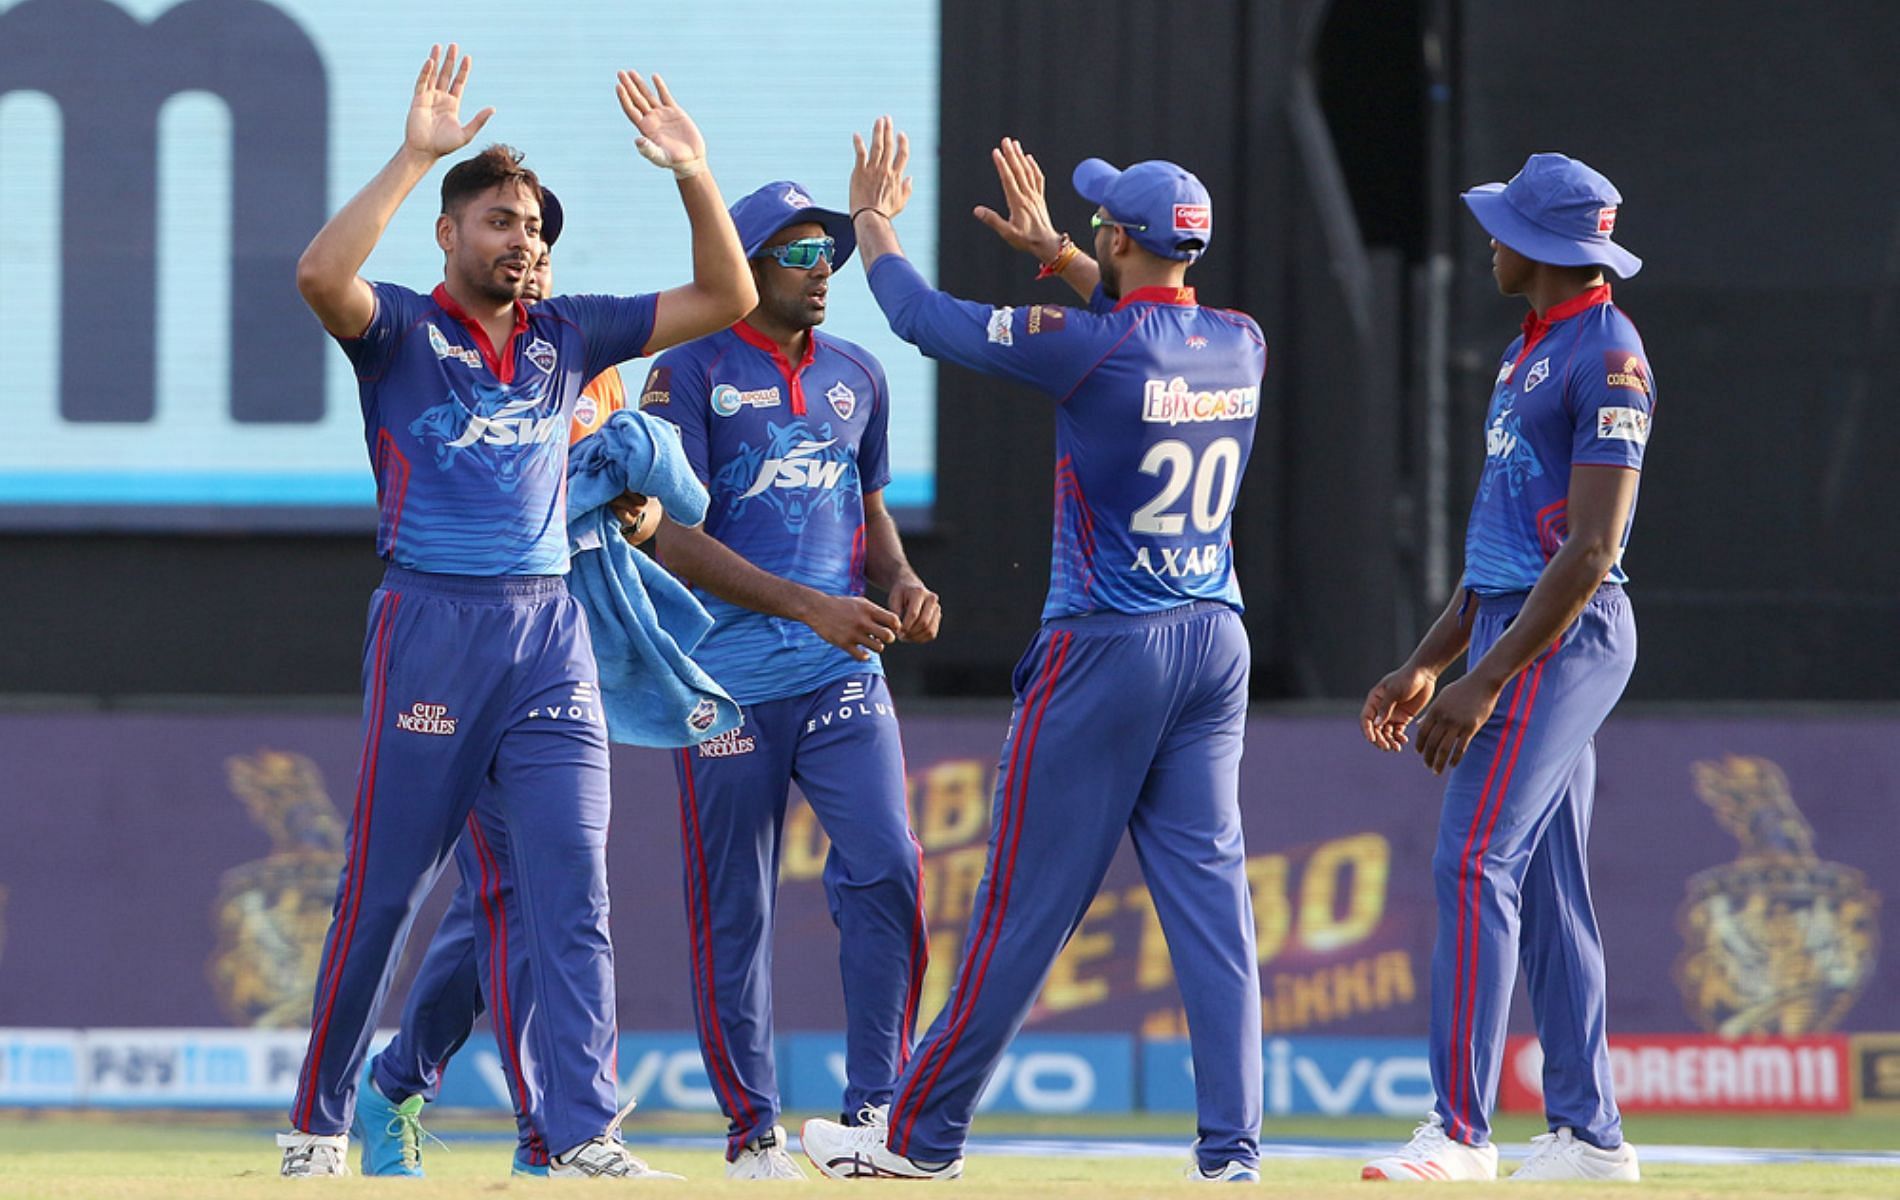 Delhi Capitals reached the playoffs in IPL 2021.